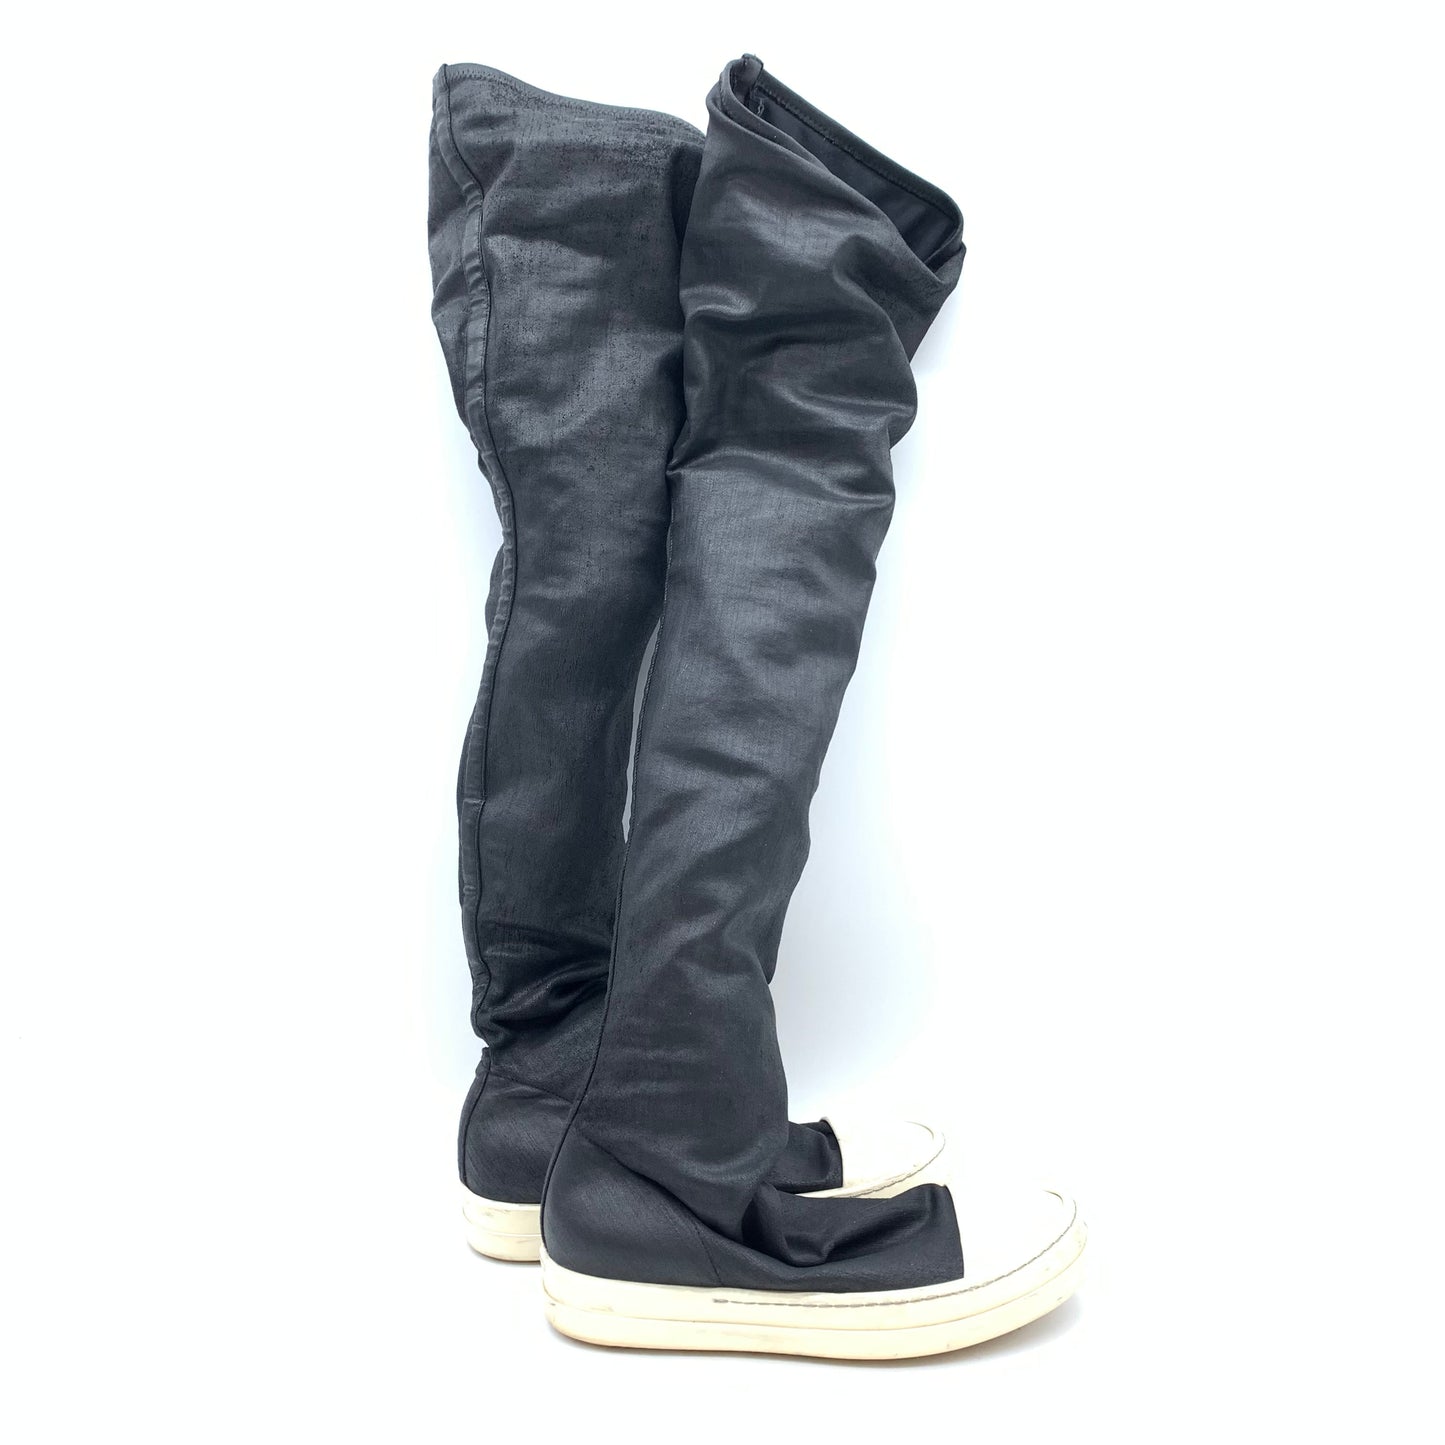 Shoes Luxury Designer By Rick Owens  Size: 8.5